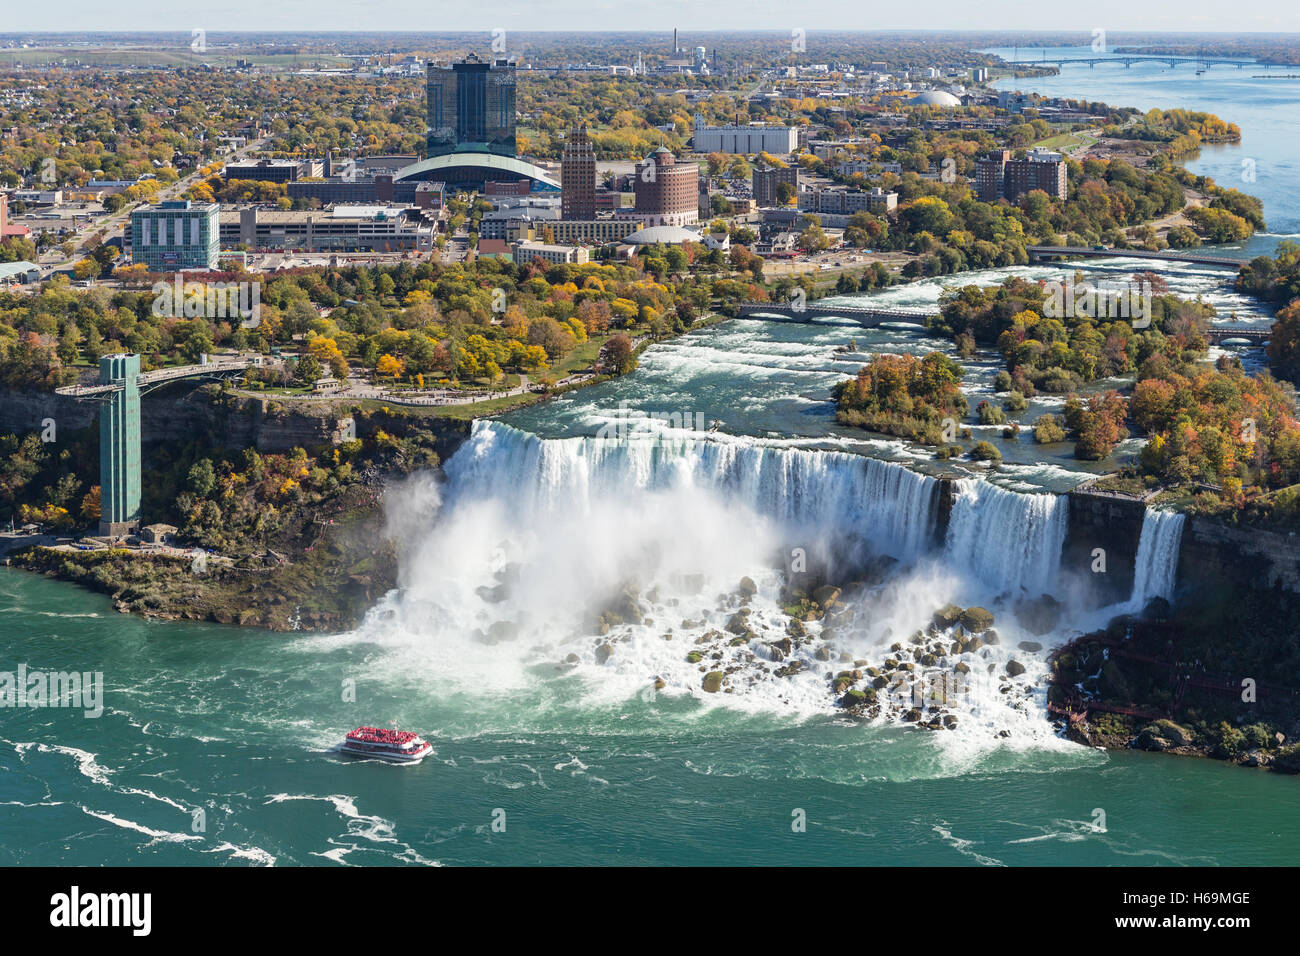 An aerial view of the American Falls and Niagara Falls, New York during autumn. Stock Photo